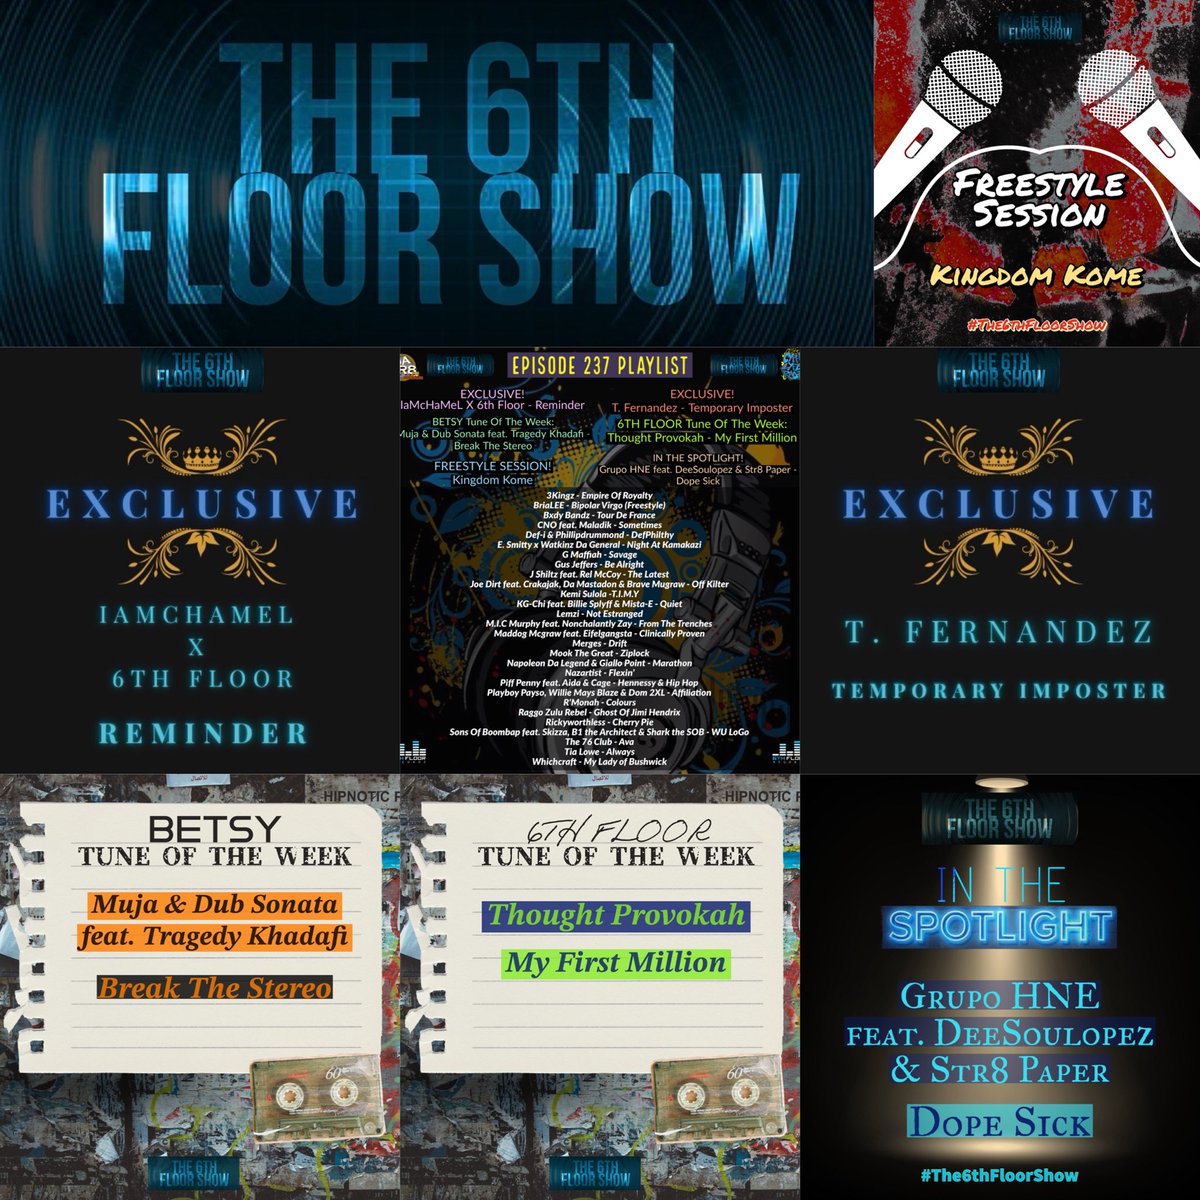 #OutNow Episode 237 #The6thFloorShow podcasts.apple.com/gb/podcast/the… music.amazon.co.uk/podcasts/cde4a… mediafire.com/file/goau4wlab… audiomack.com/the-6th-floor-… deezer.page.link/4b6nB9dxpuP8hp…